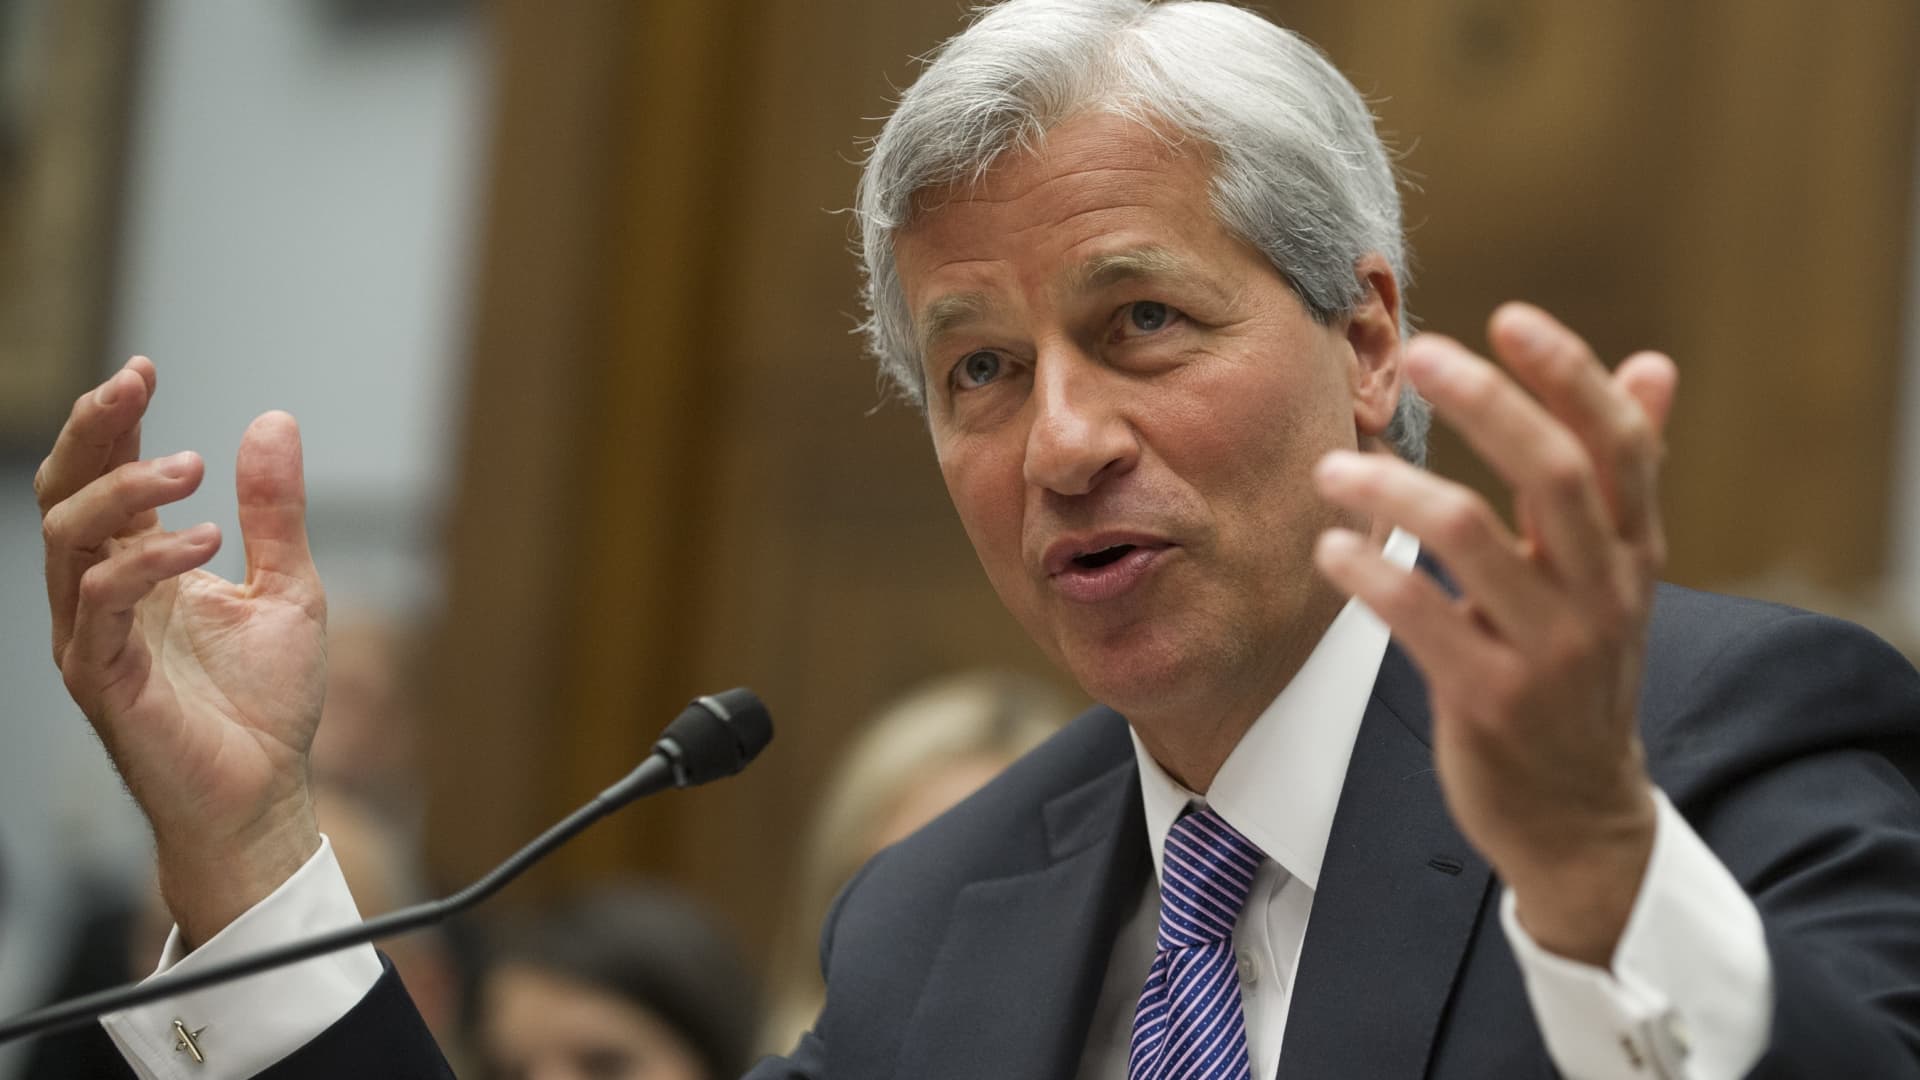 JPMorgan Chase Chairman and CEO Jamie Dimon testifies during a US House Financial Services Committee hearing on Capitol Hill in Washington, DC, June 19, 2012, about JPMorgan Chase's trading loss.